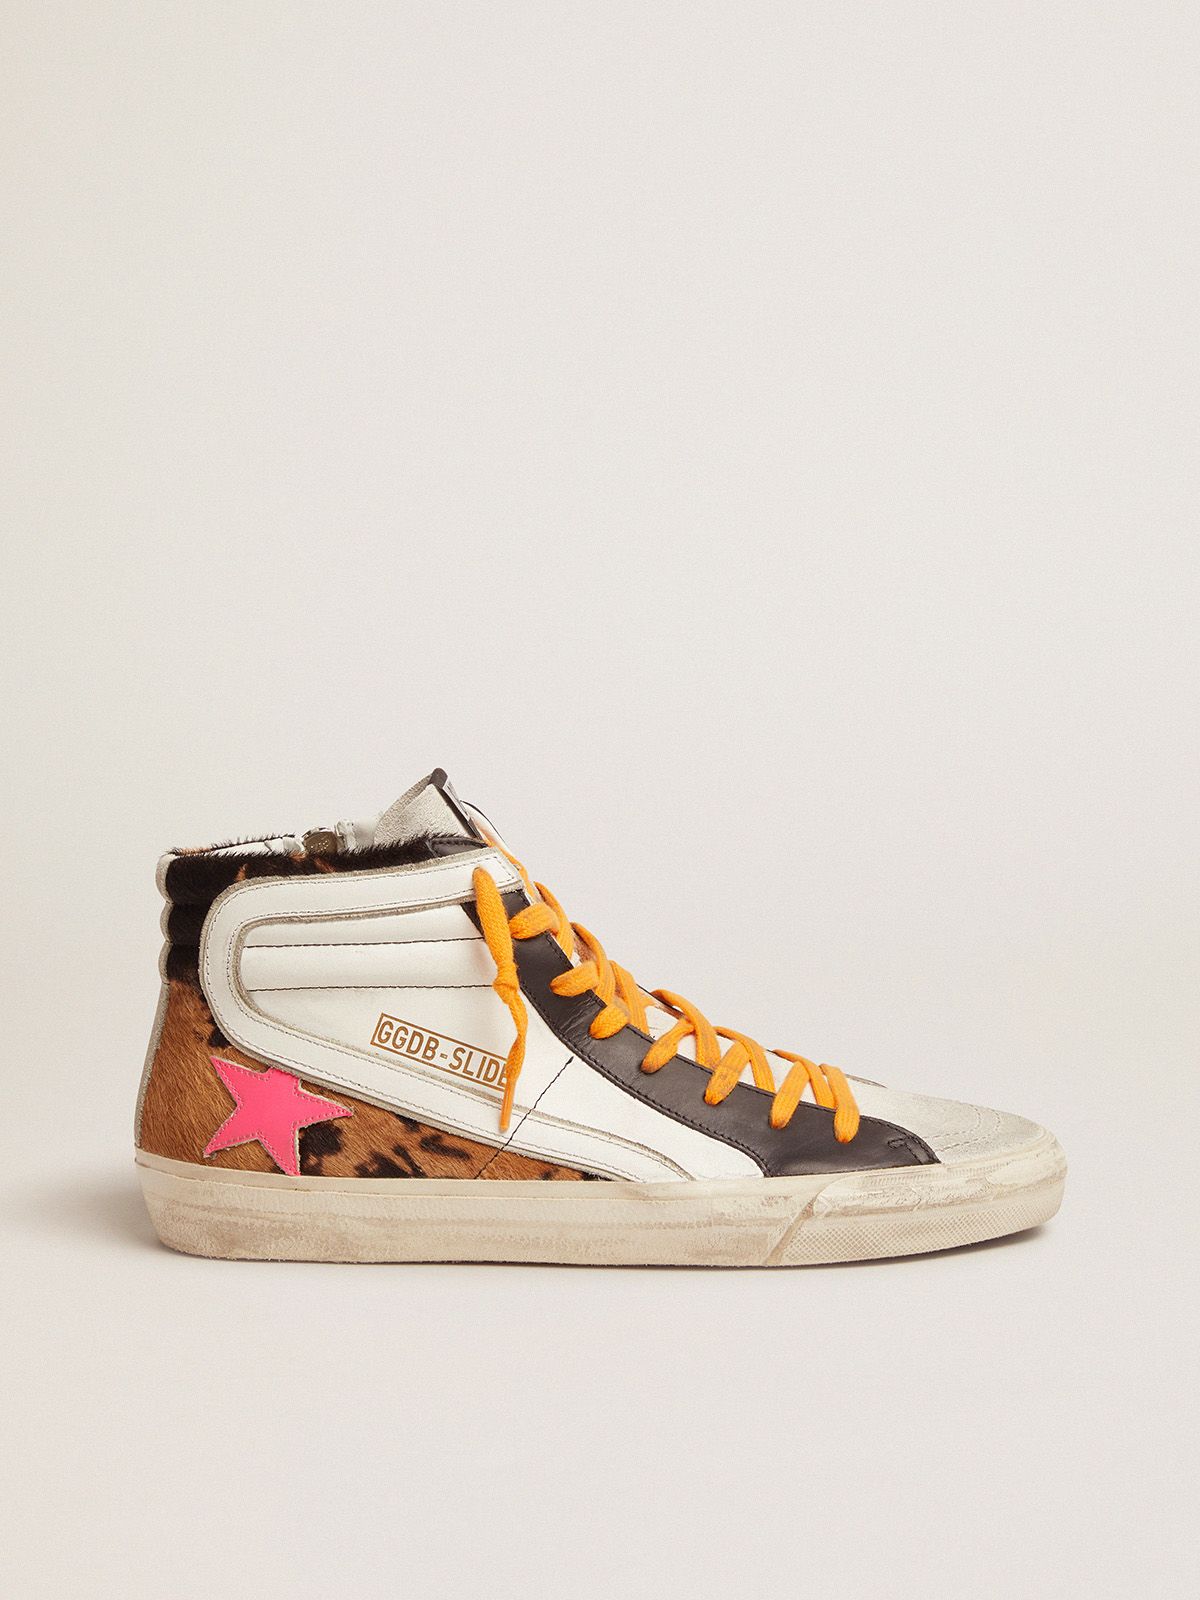 golden goose sneakers and a skin, Slide leather orange in laces with star suede pony fuchsia